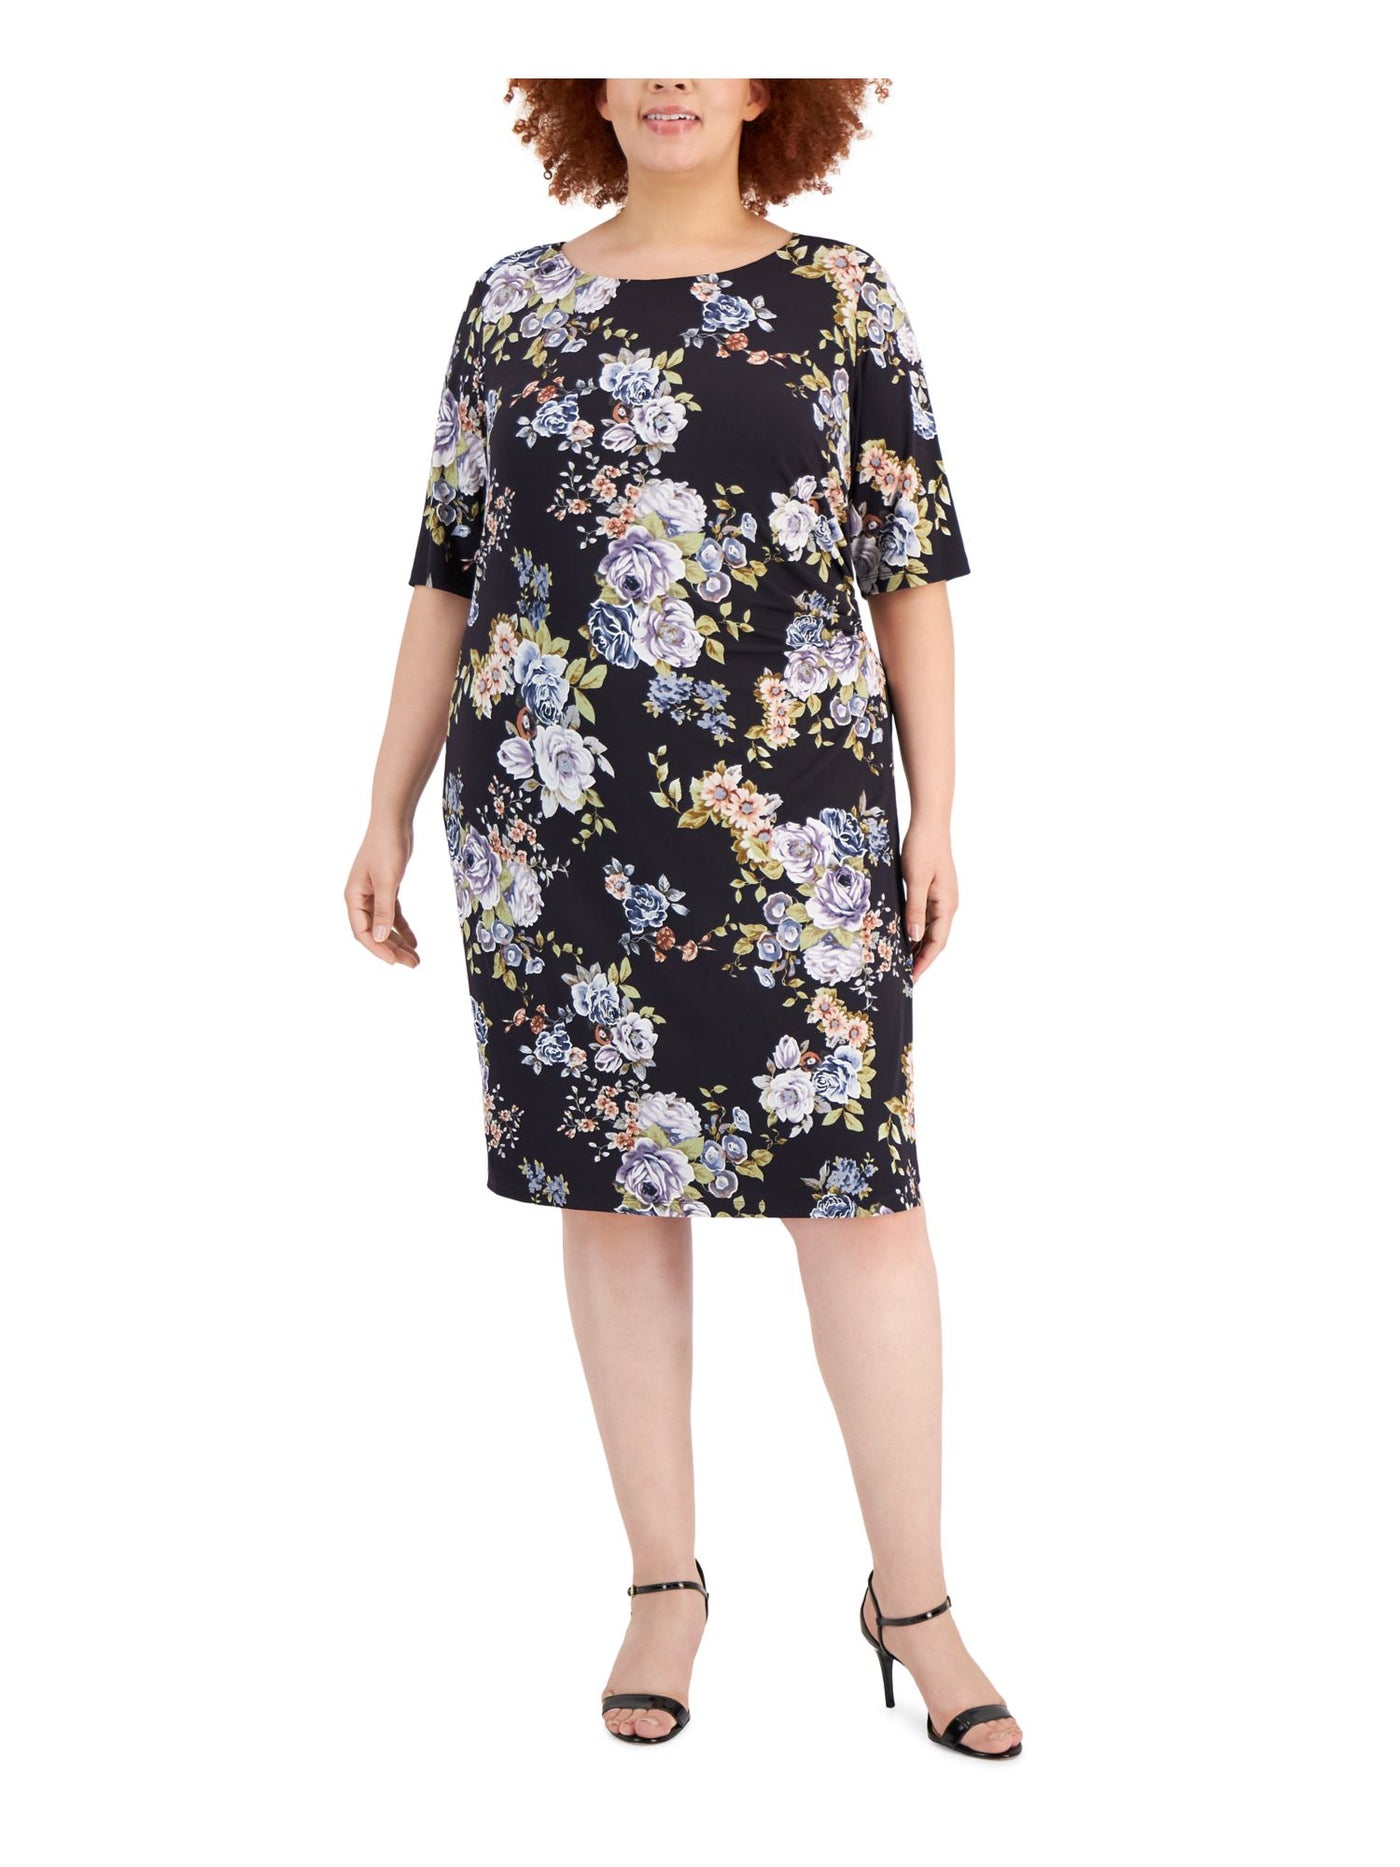 CONNECTED APPAREL Womens Purple Lined Pullover Floral Short Sleeve Round Neck Knee Length Wear To Work Sheath Dress Plus 20W